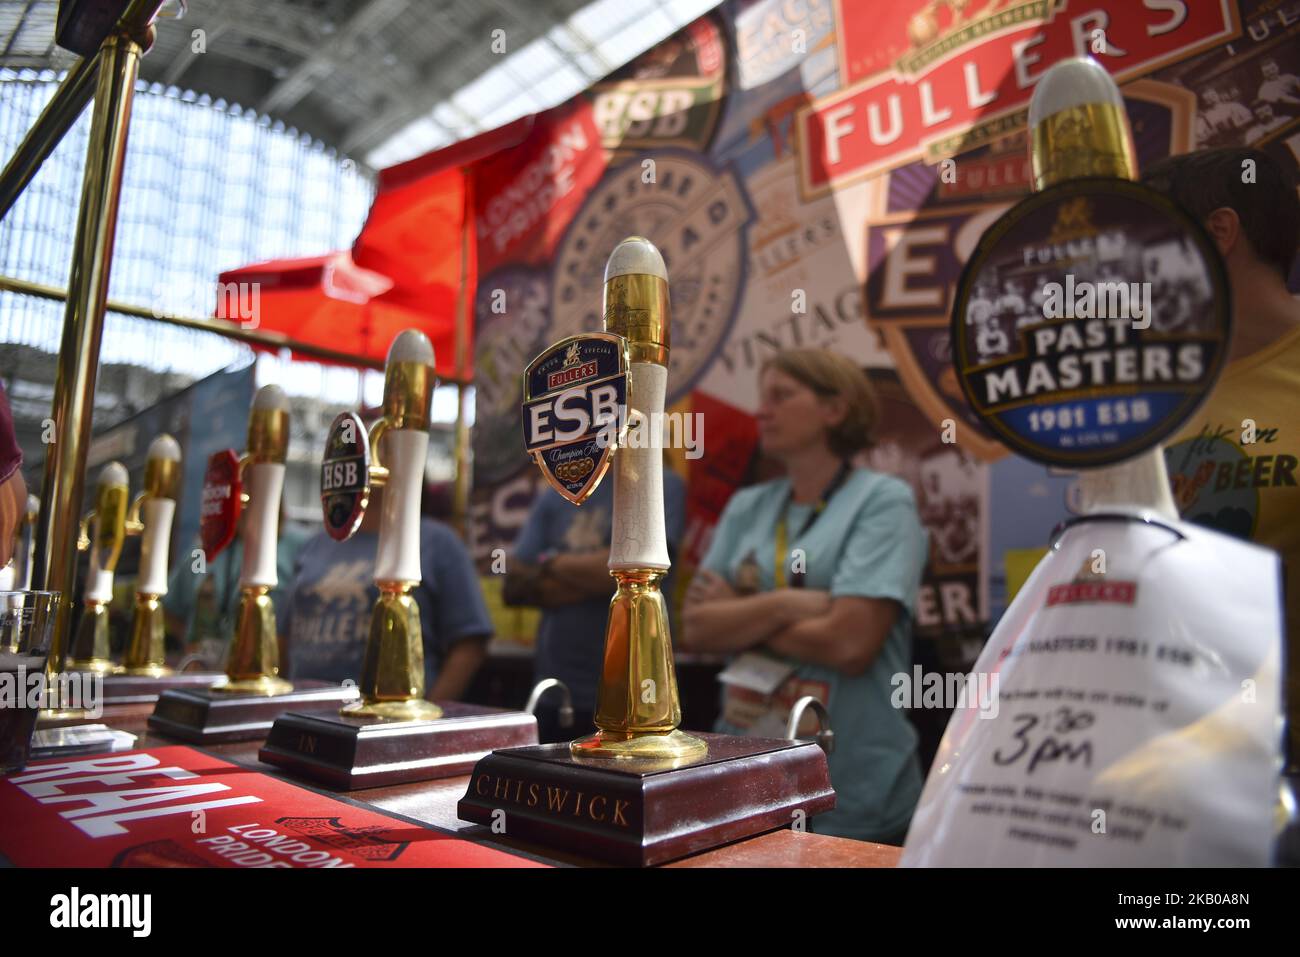 Visitors are seen at the CAMRA (Campaign for Real Ale) Great British Beer festival at Olympia exhibition centre, London on August 7, 2018. The five day event is Britain's largest beer festival with around 55,000 people expected to attend. The festival features over 900 real ales and ciders from around the world. (Photo by Alberto Pezzali/NurPhoto) Stock Photo